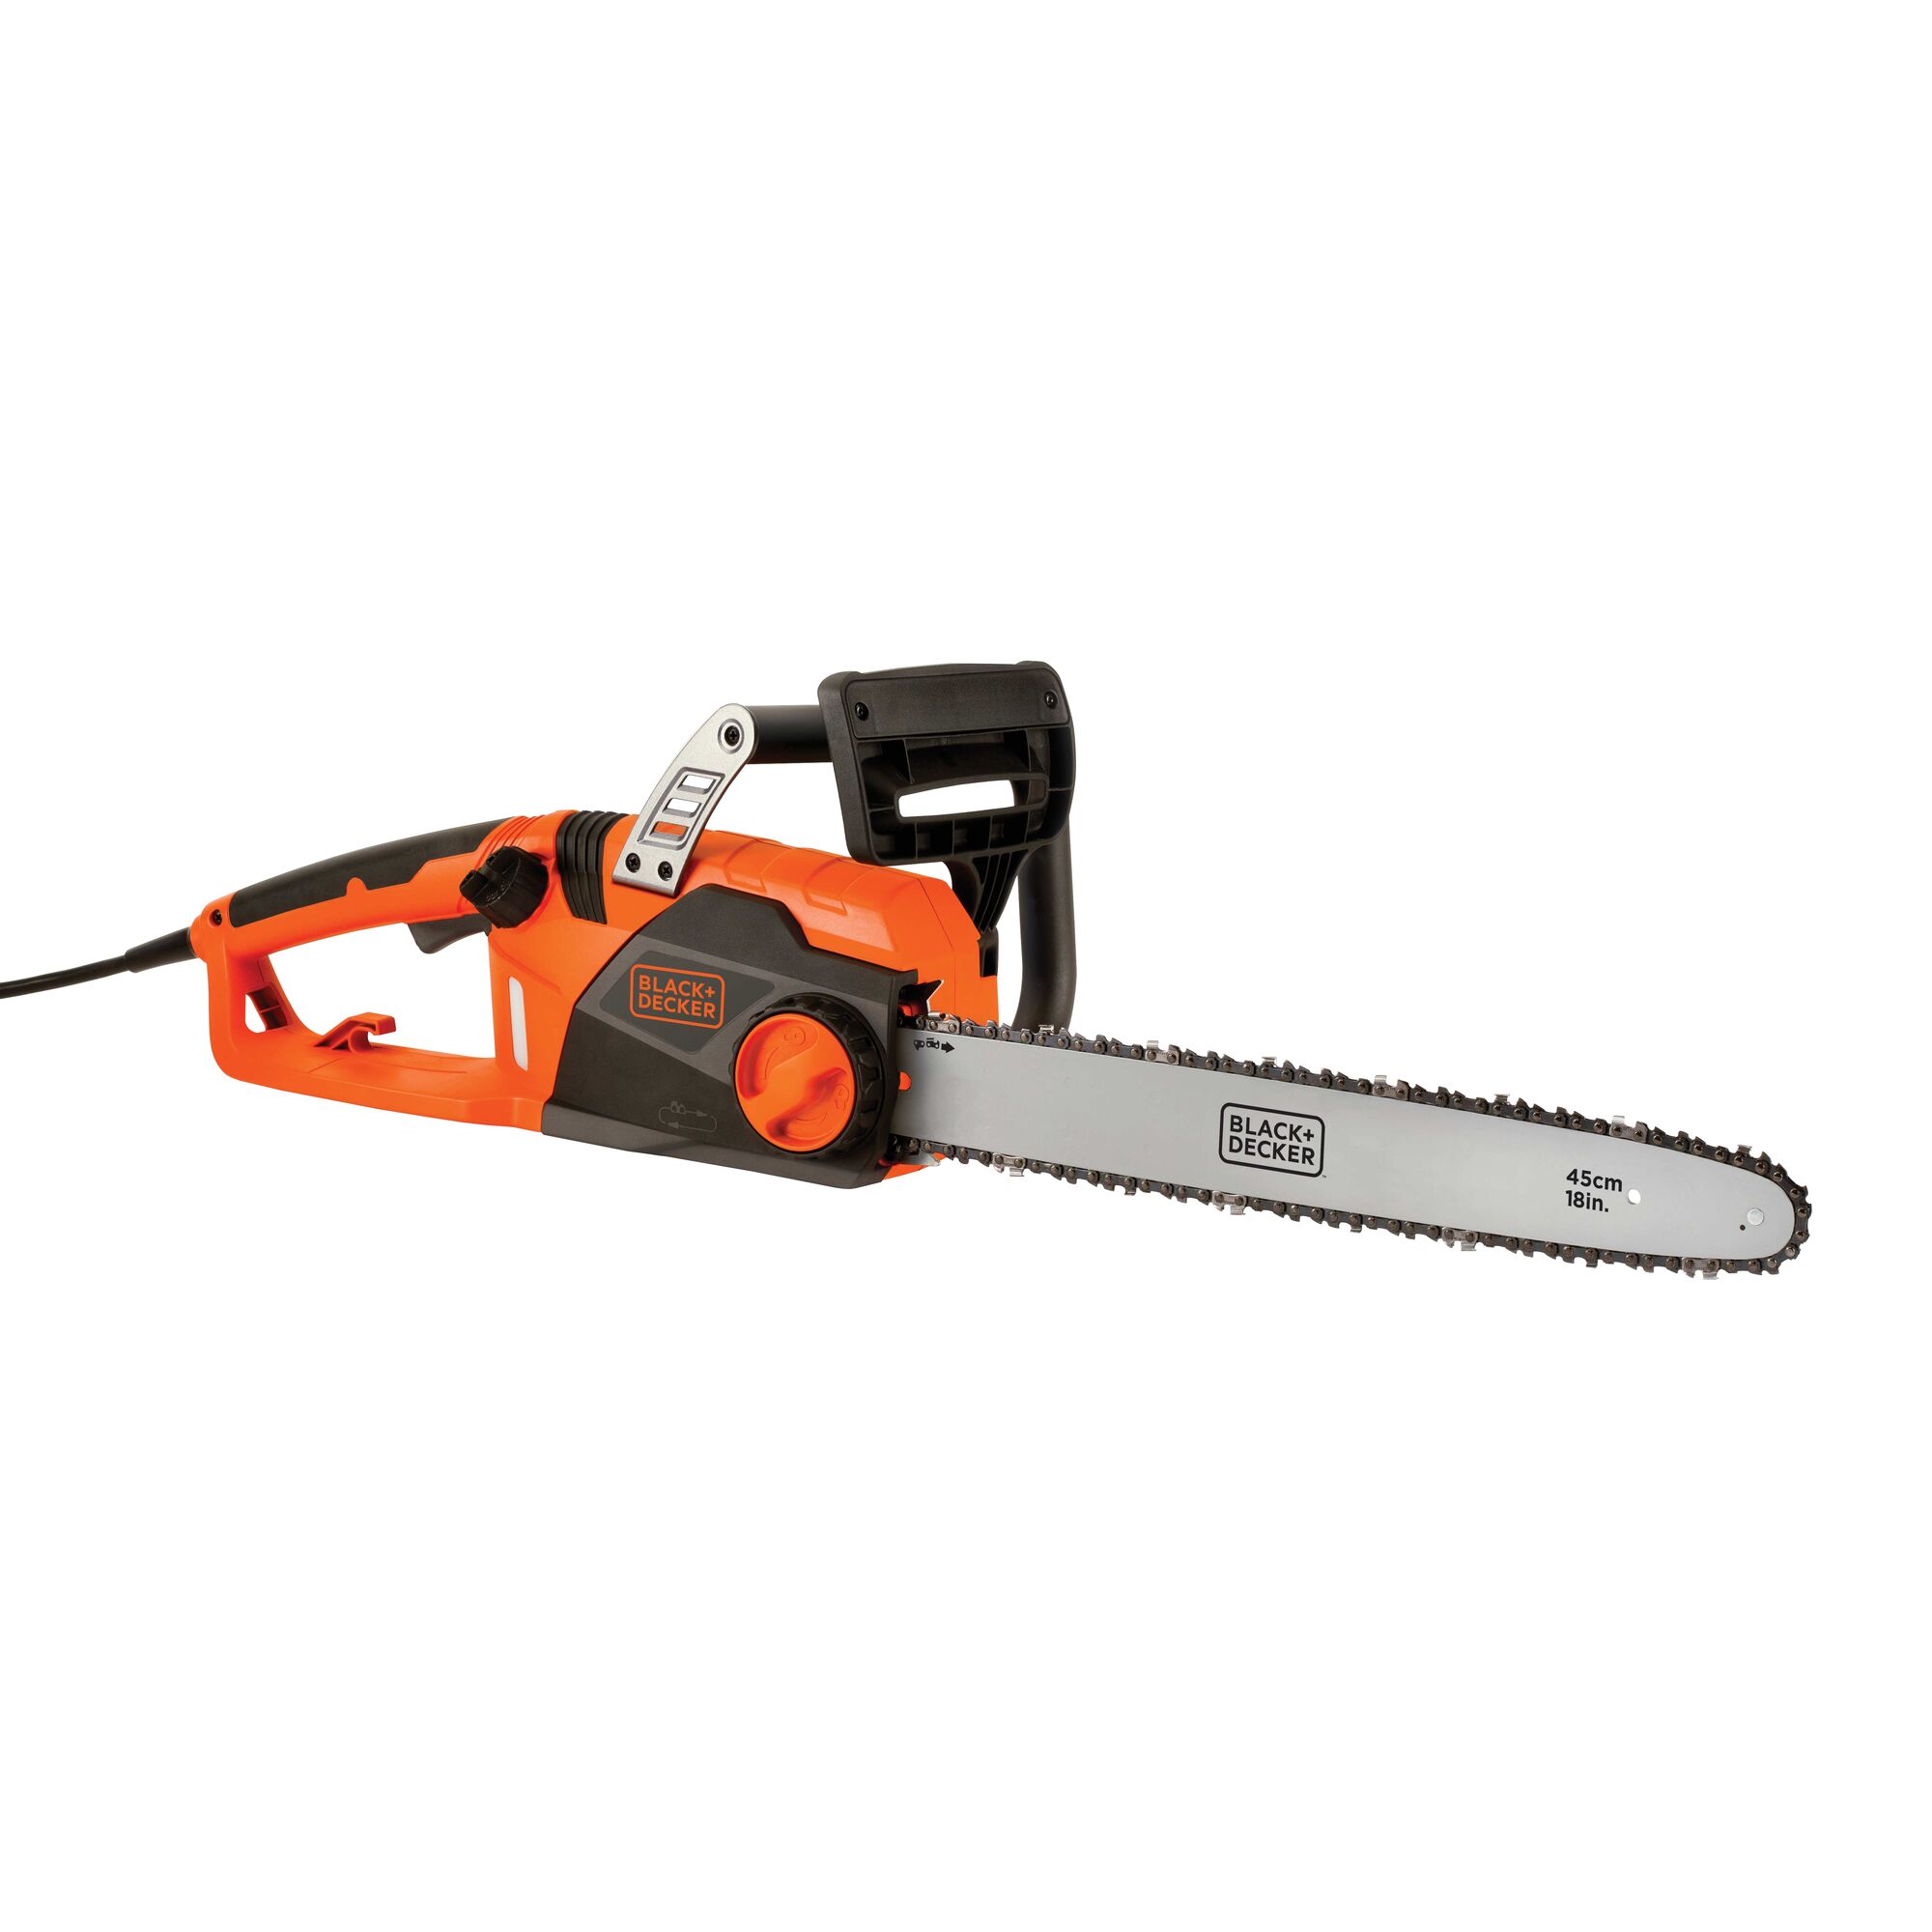 Profile of 15 amp 18 inch chainsaw.